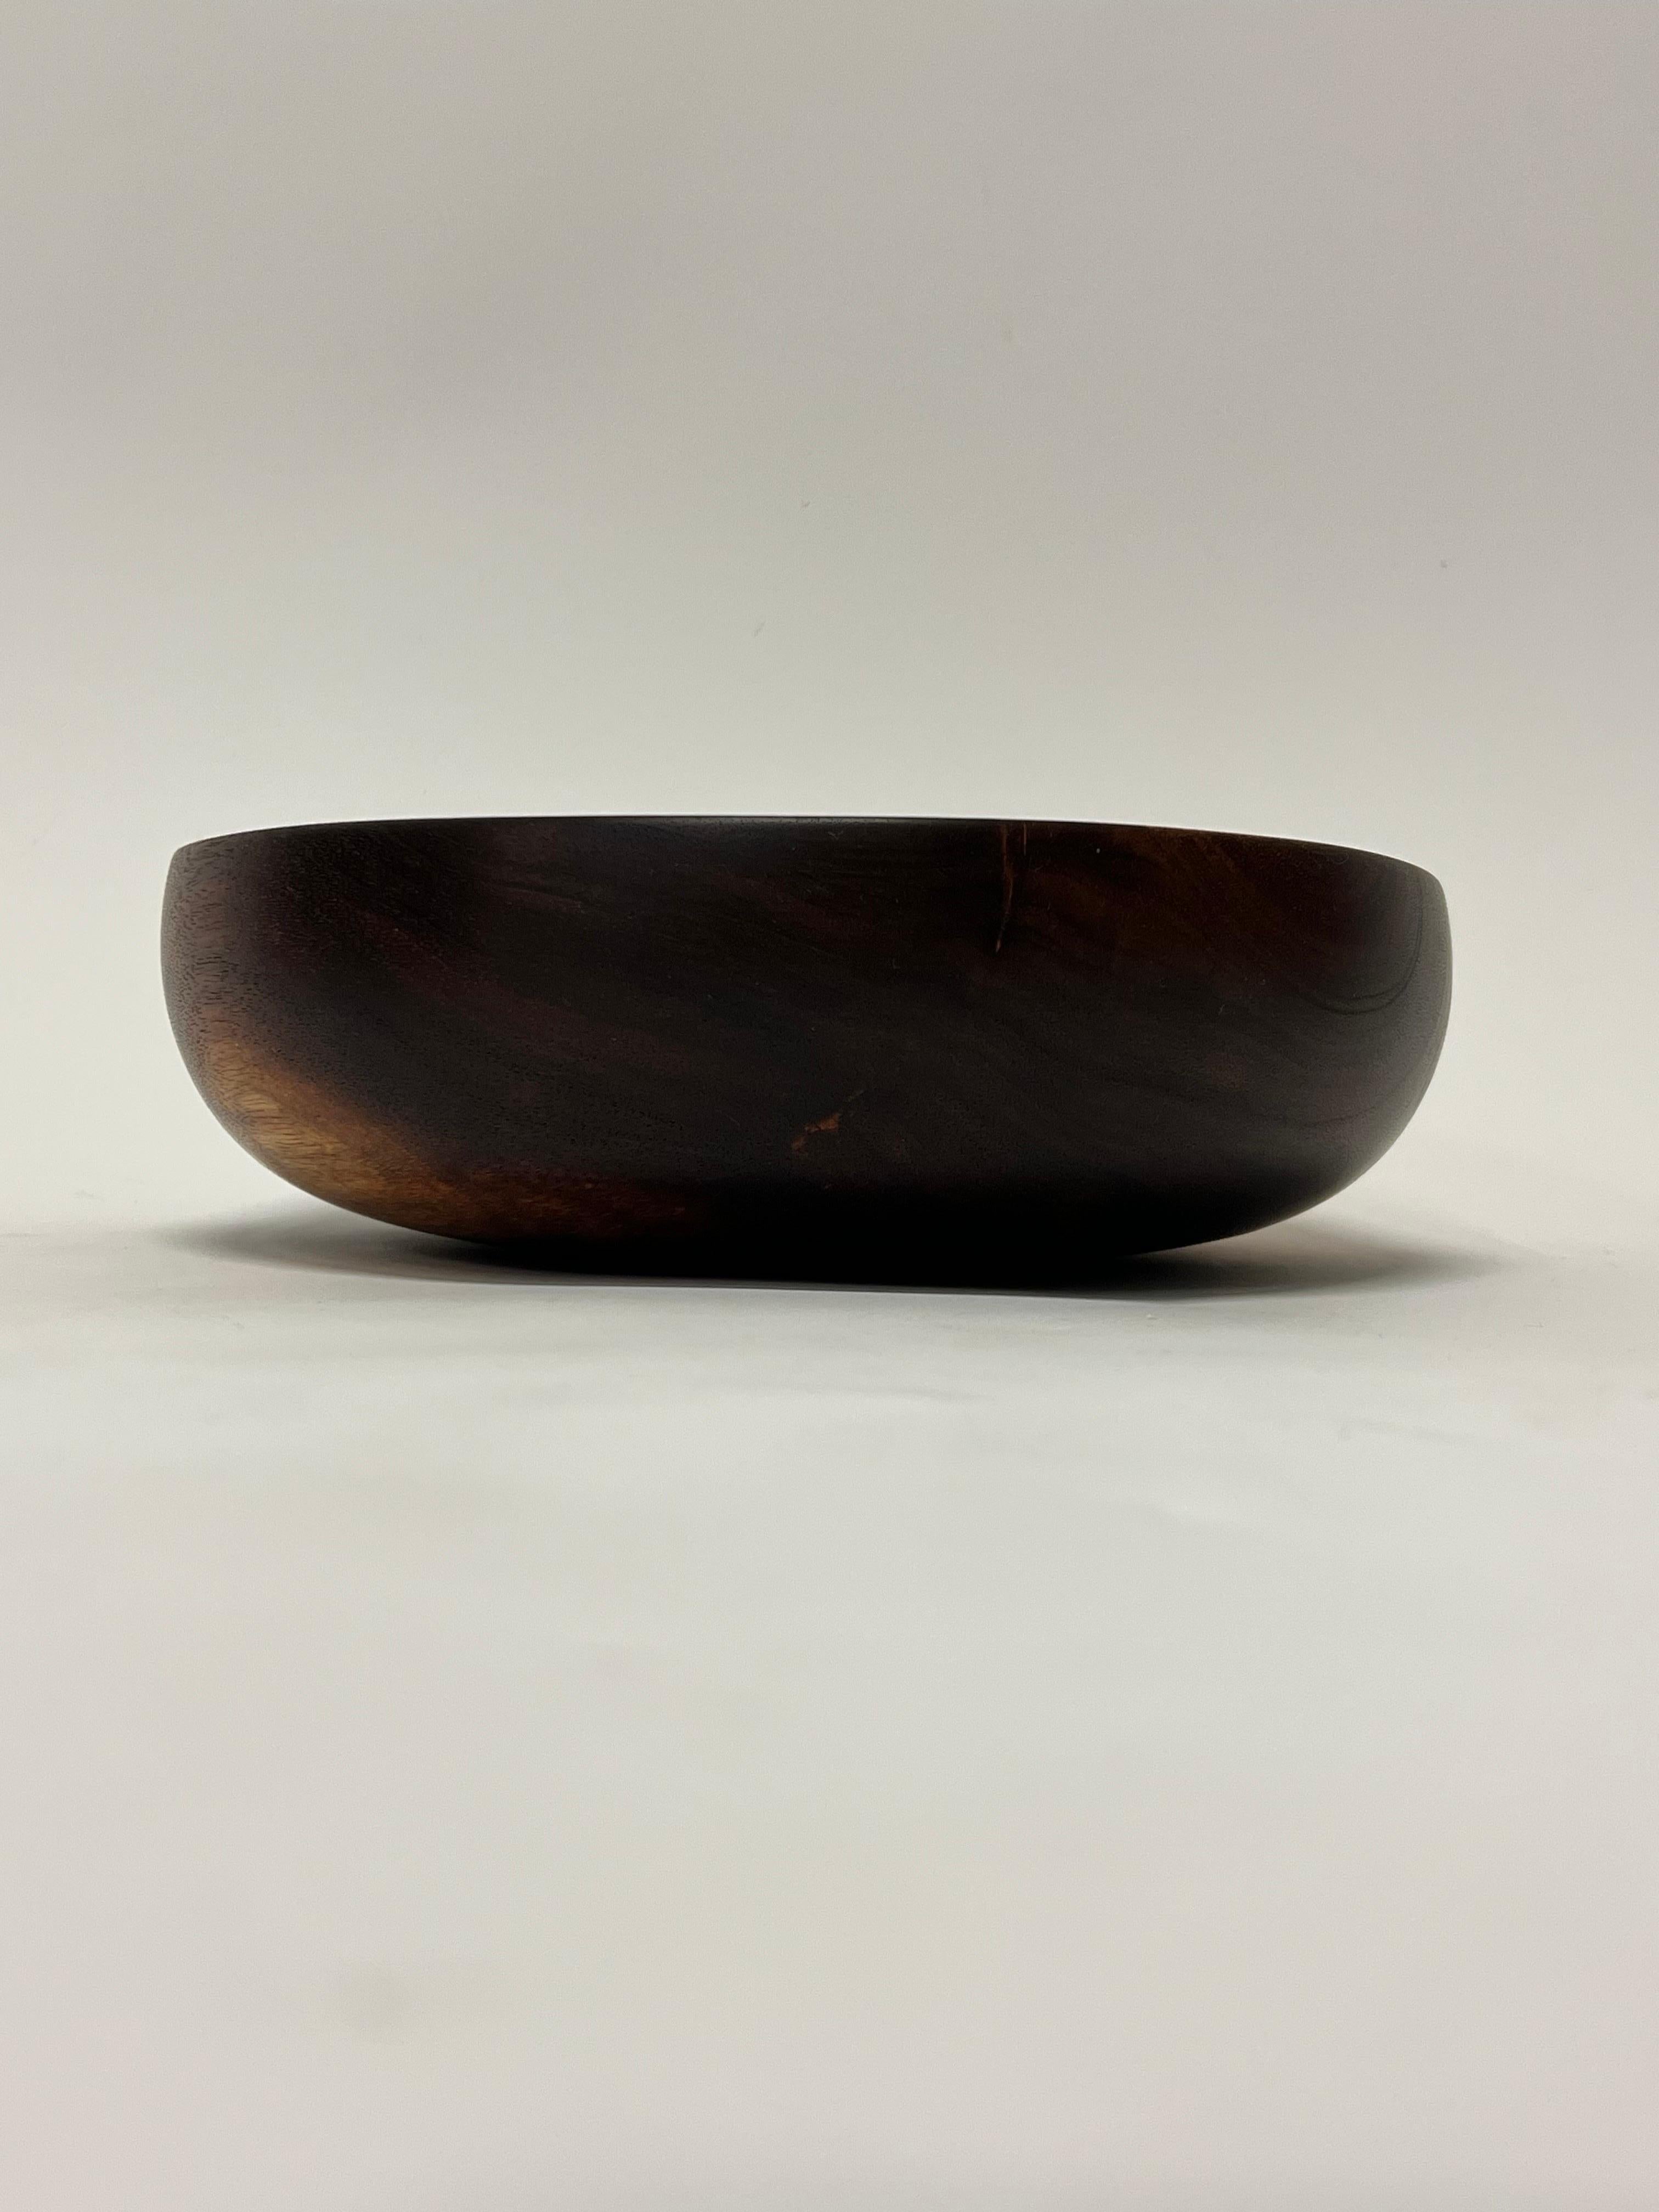 Beautiful Koa wood bowl by master woodturner, Jack Straka c1970s. 

Straka is very respected and admired and has influenced the work of a new generation of artists. He used only woods native to Hawaii, harvesting most of his material from